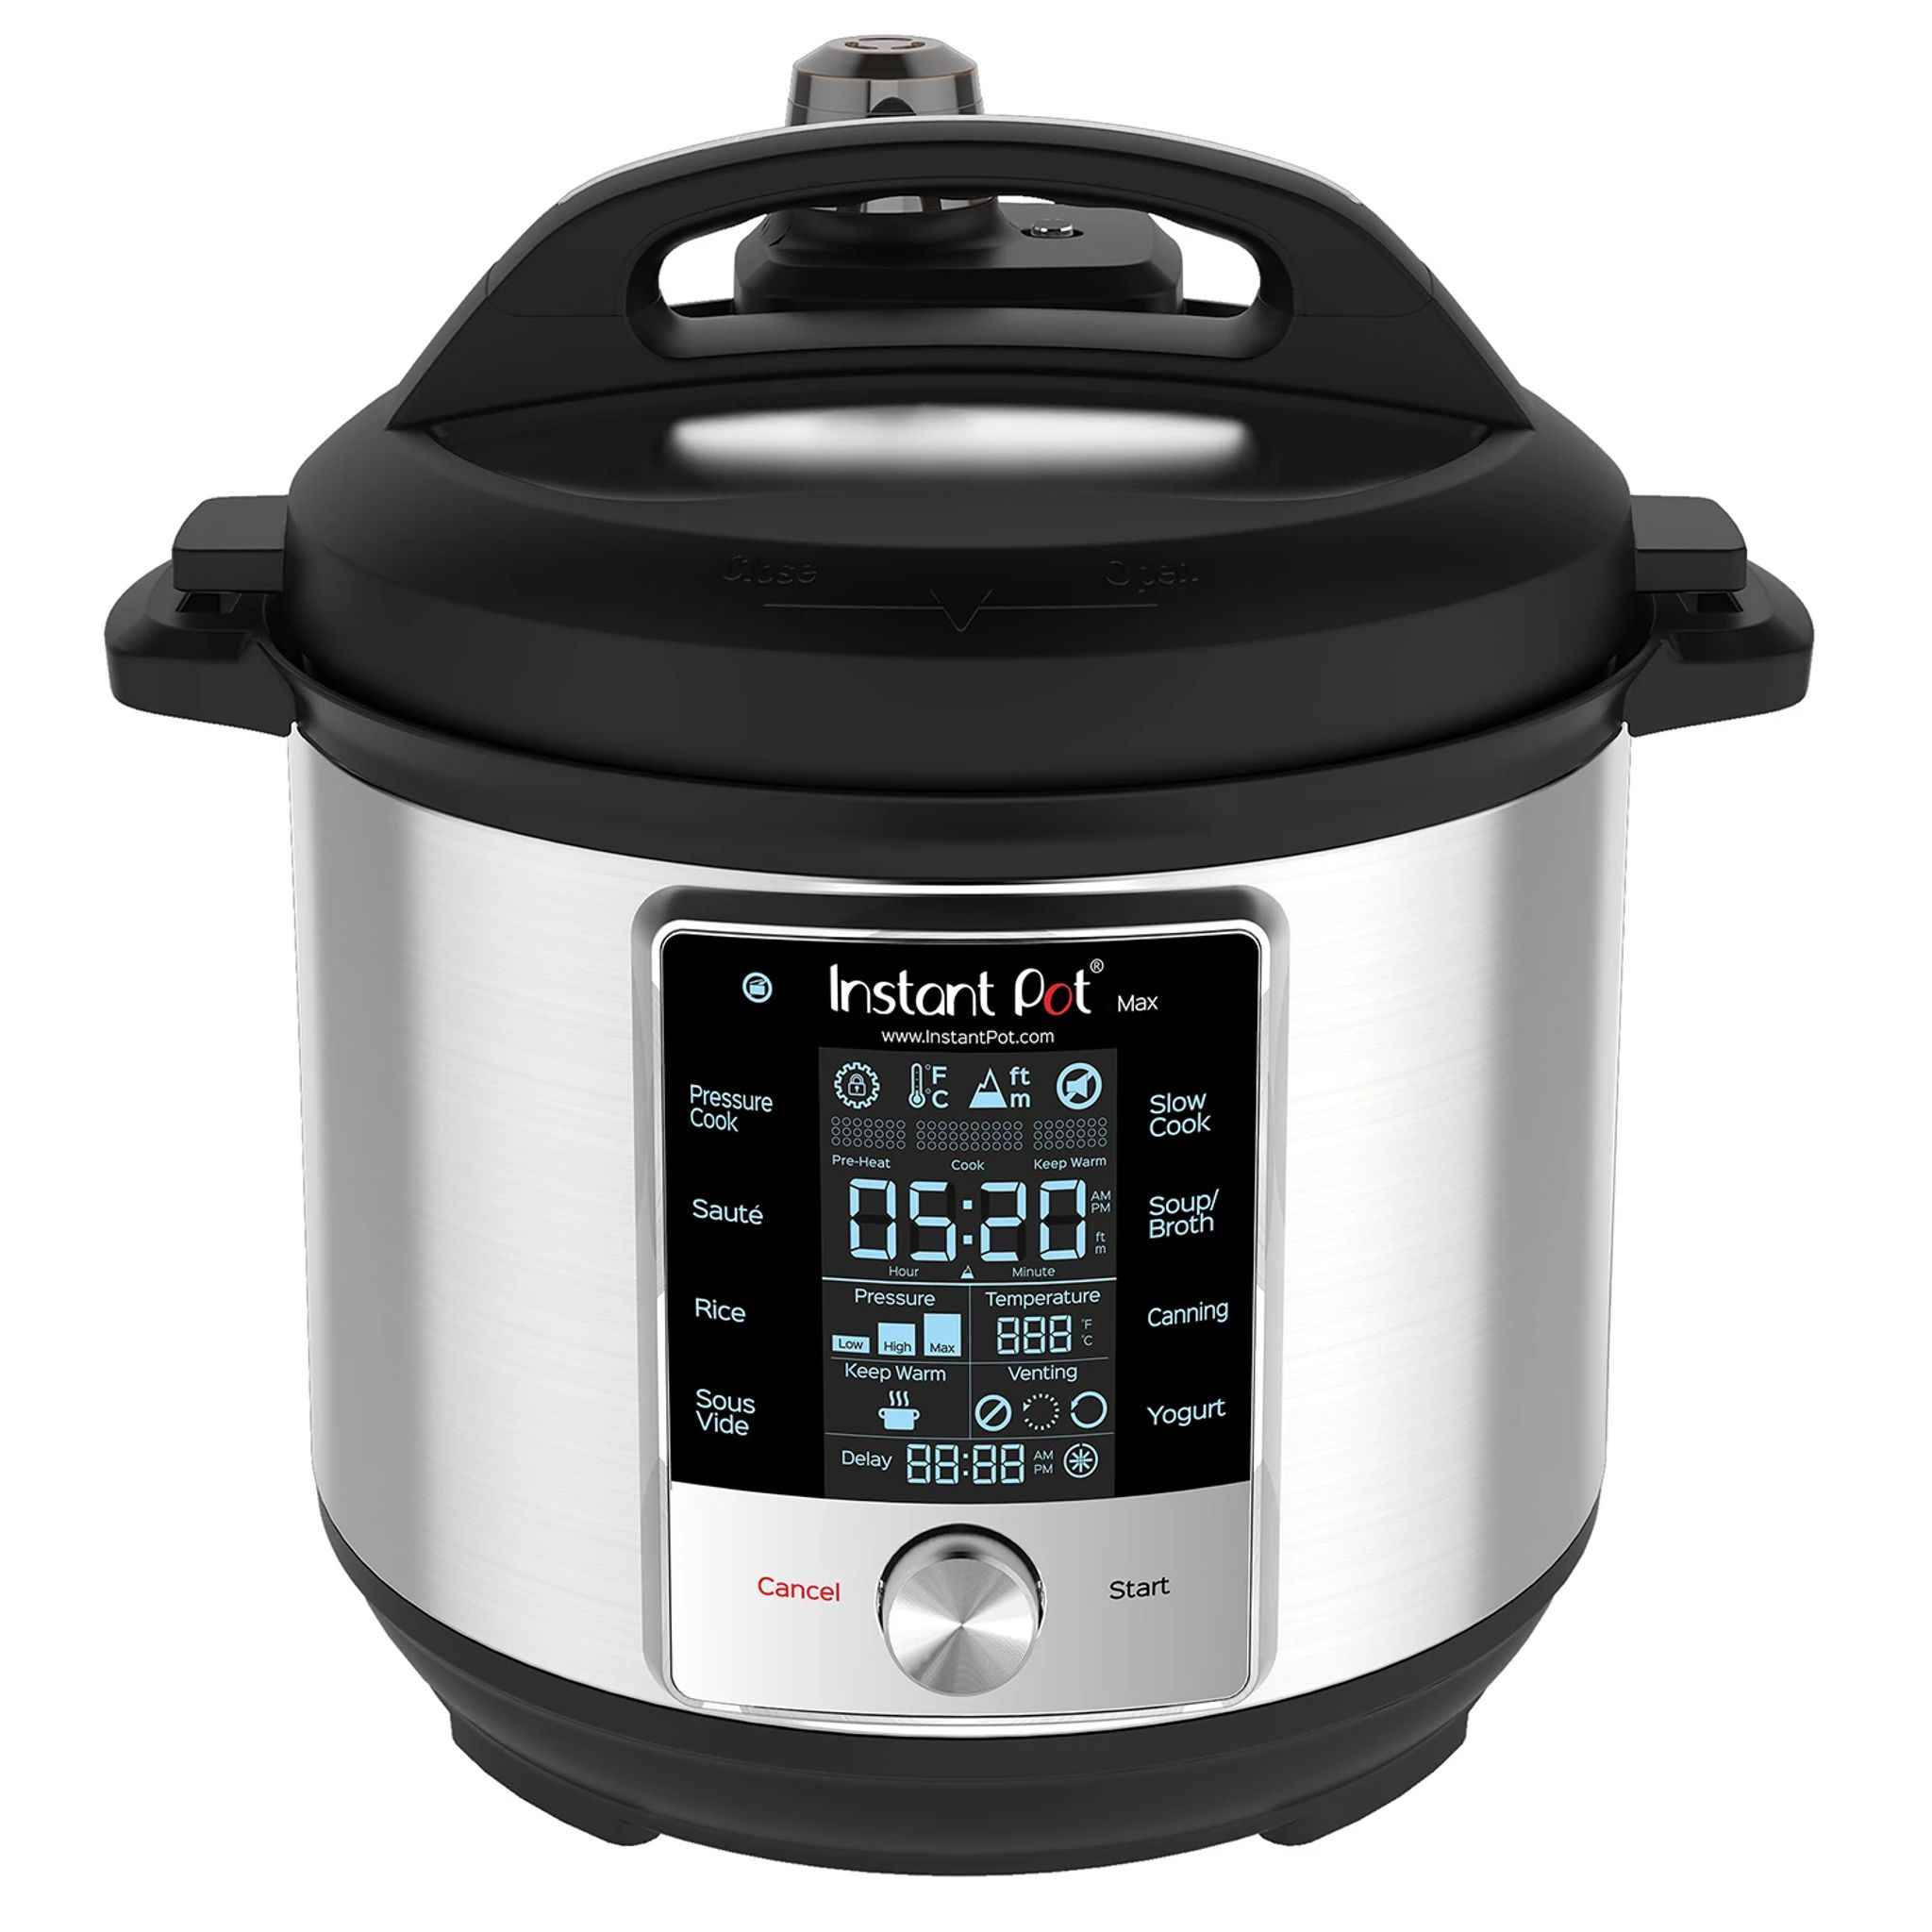 How Much (Money & Electricity) Does It Cost To Run An Instant Pot